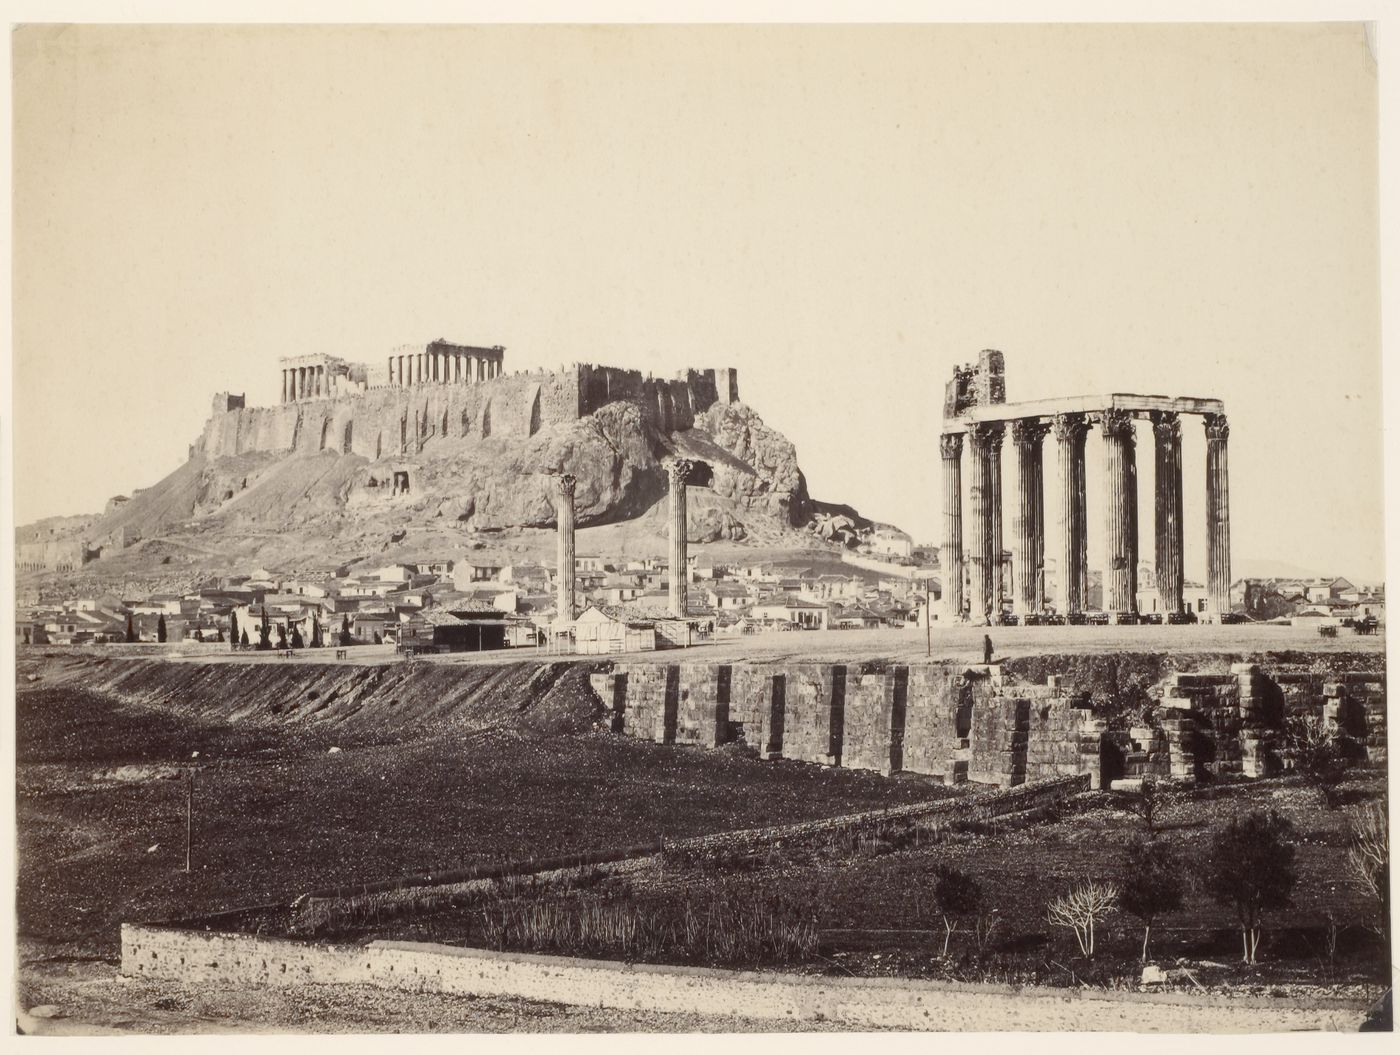 Temple of Zeus and Acropolis, Athens, Greece